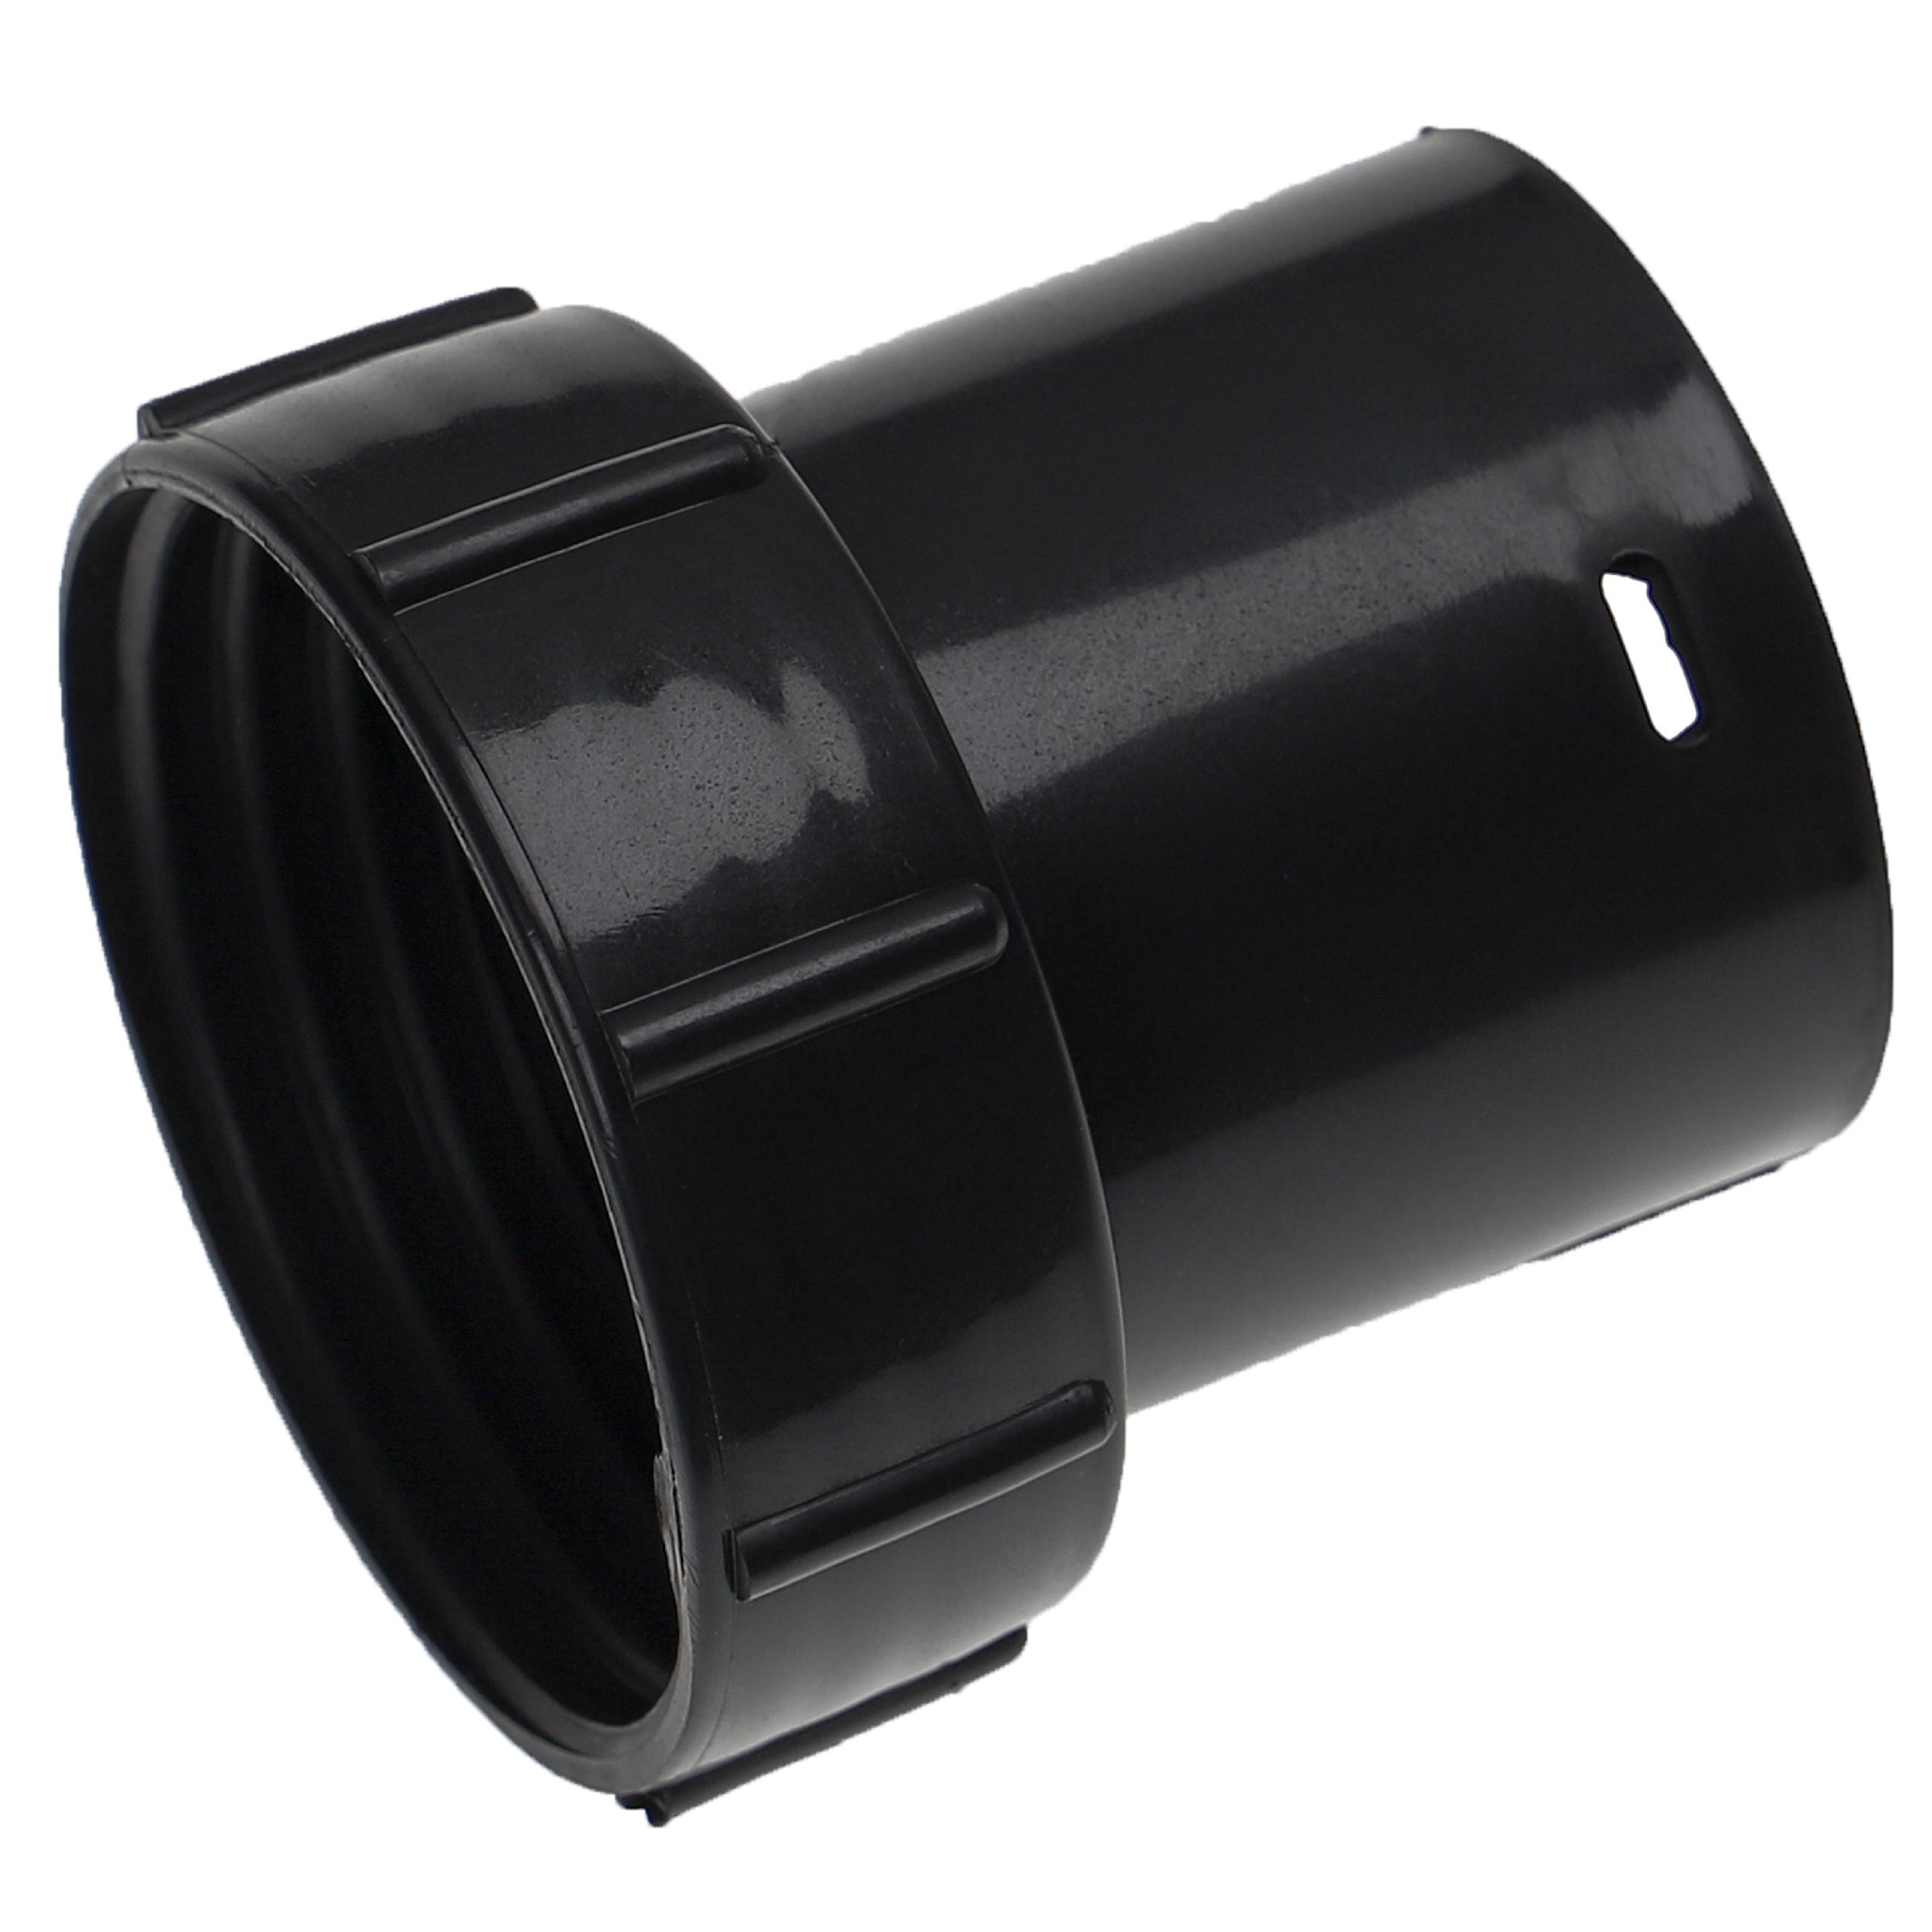 Hose Adapter for Numatic / Nilfisk Charles Vacuum Cleaner u.a. - 32 mm Round Connector, Plastic